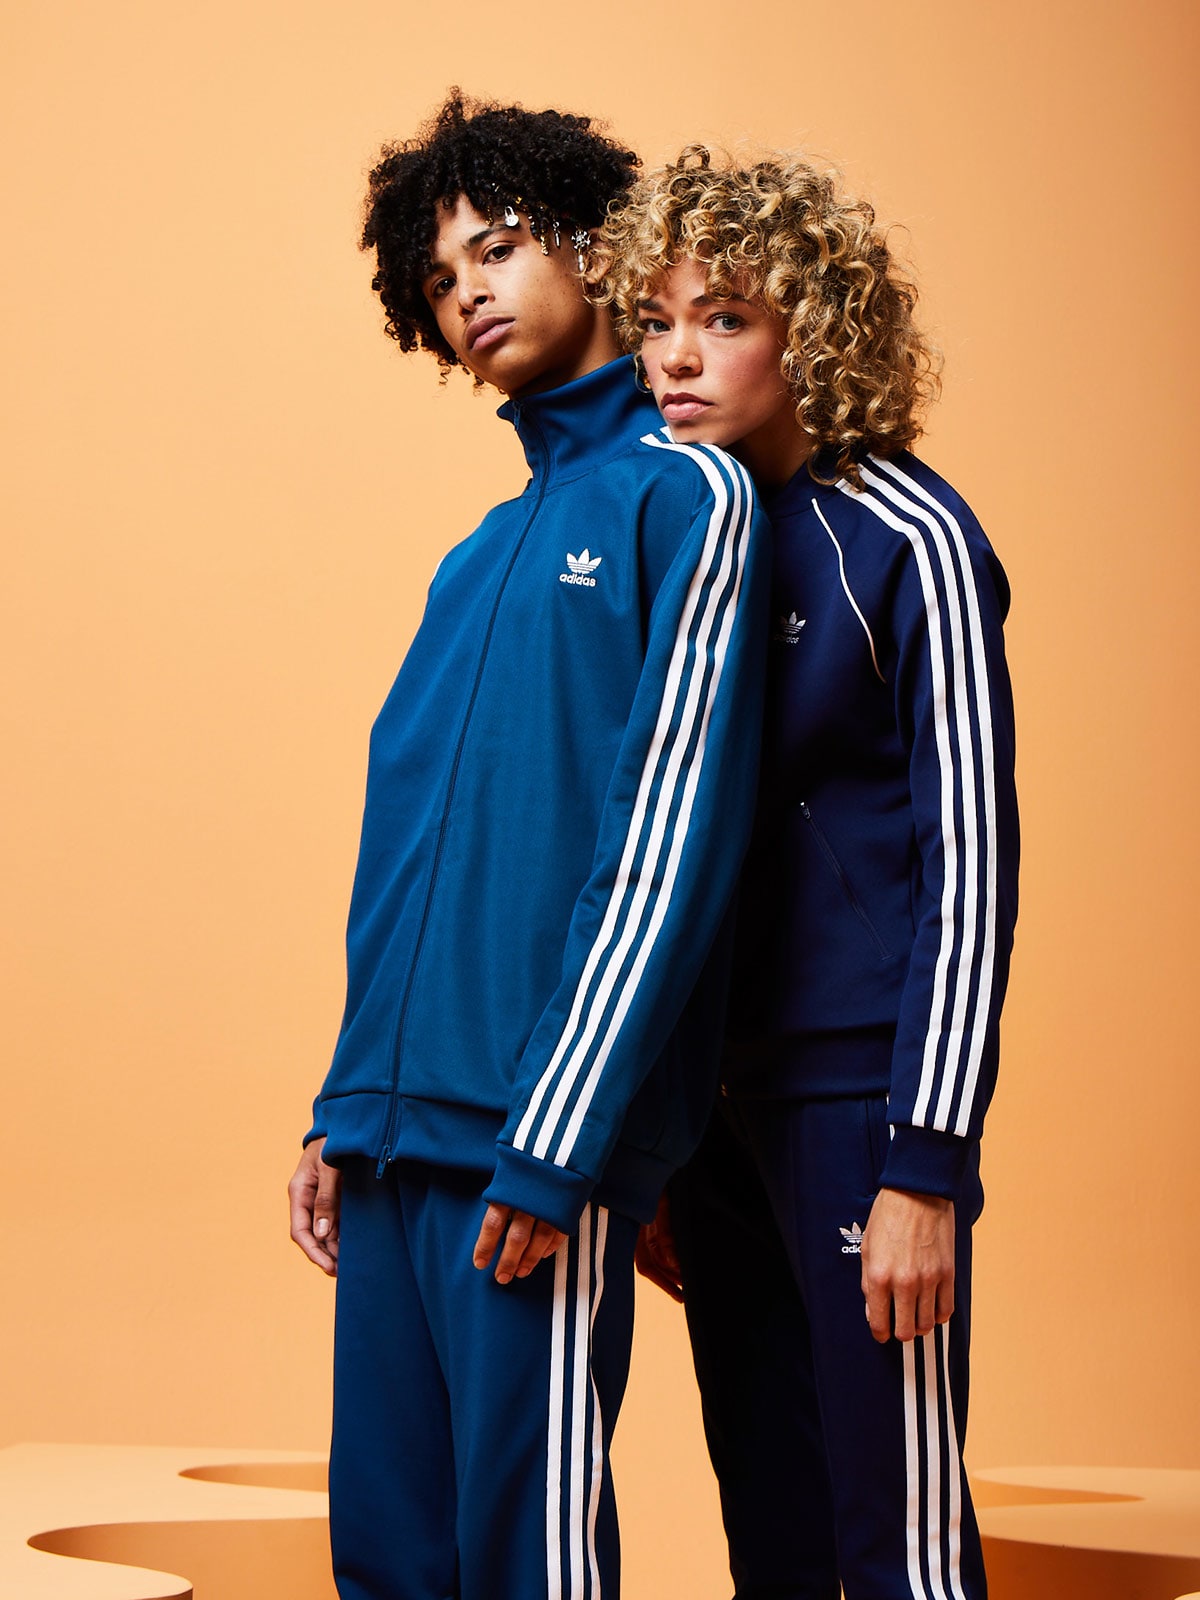 men and women matching tracksuits